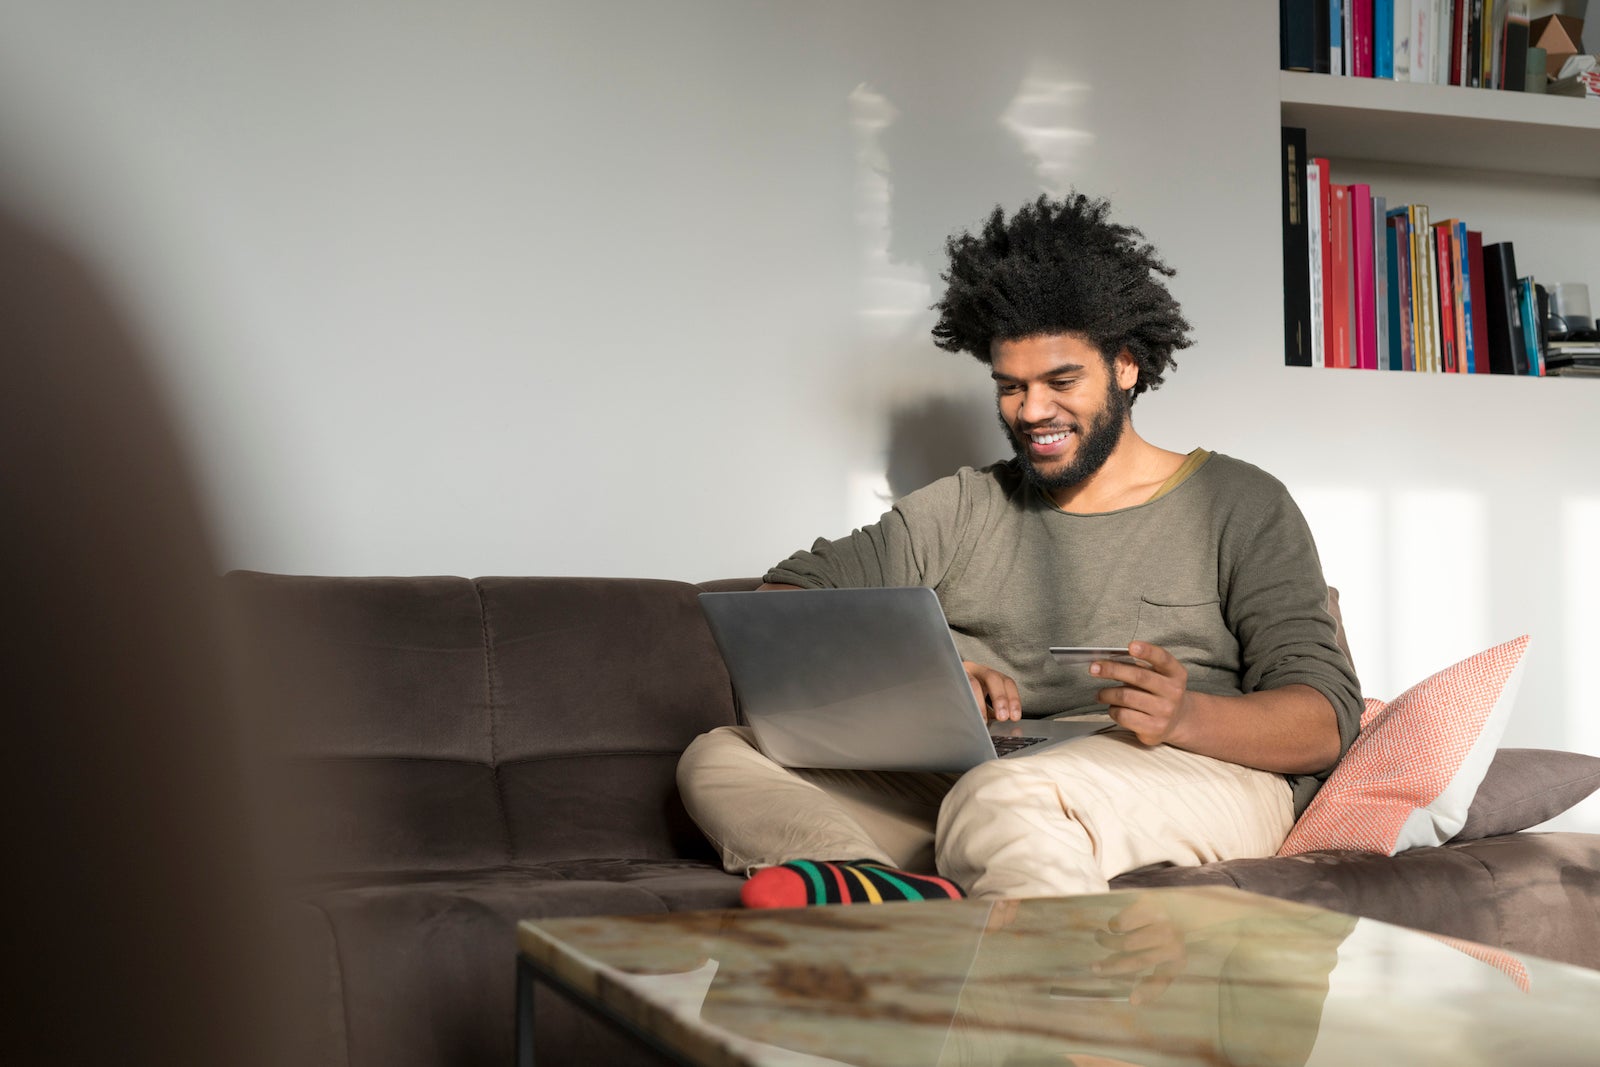 A man uses a laptop while sitting in his living room